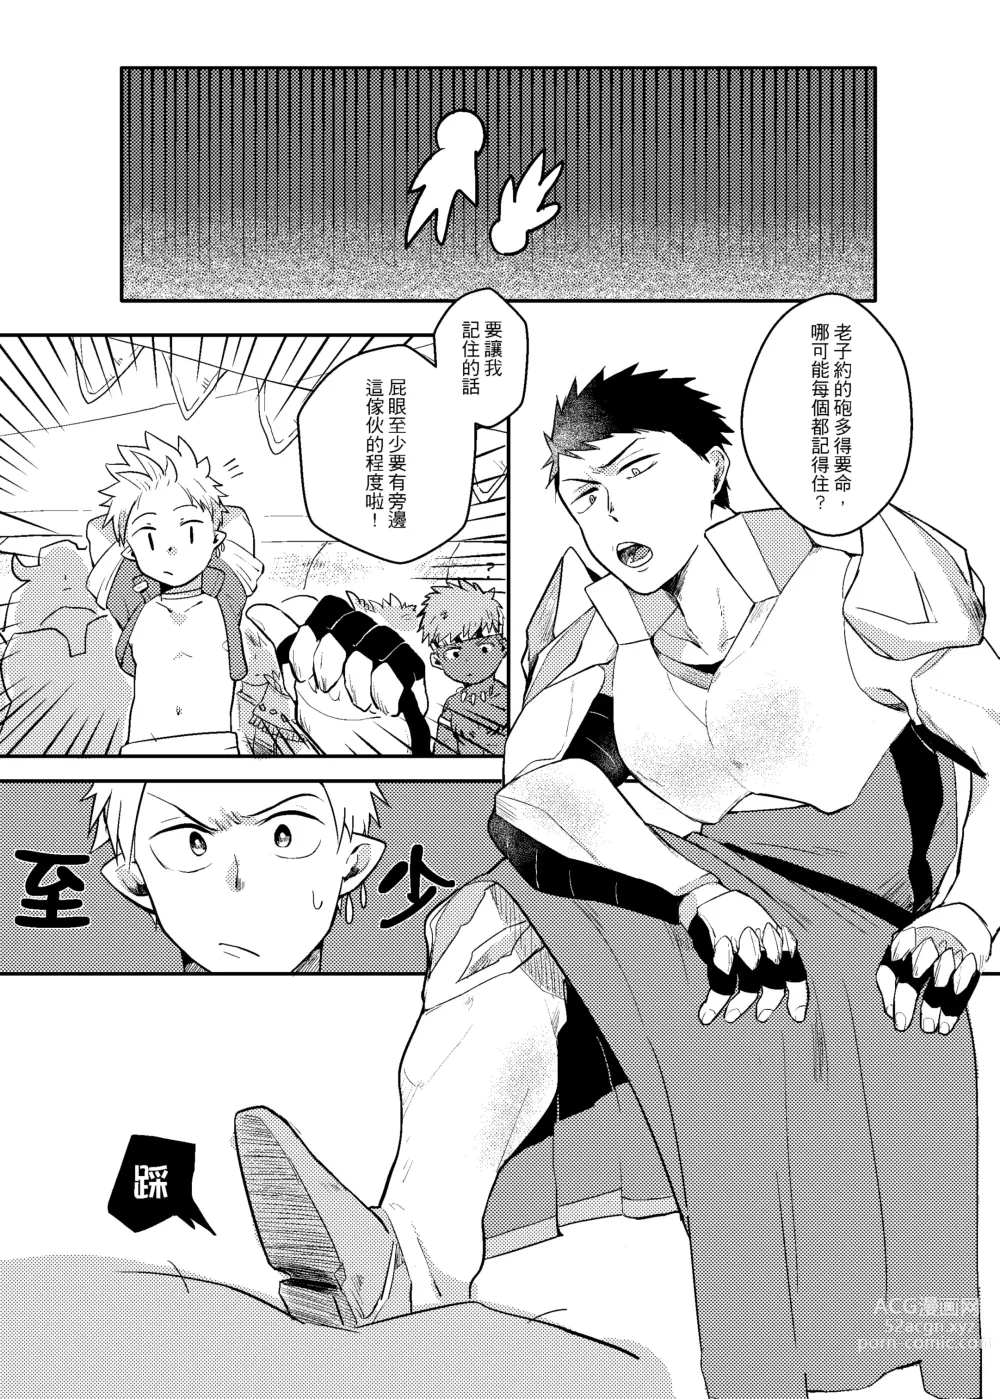 Page 10 of doujinshi One Knight Stand (decensored)